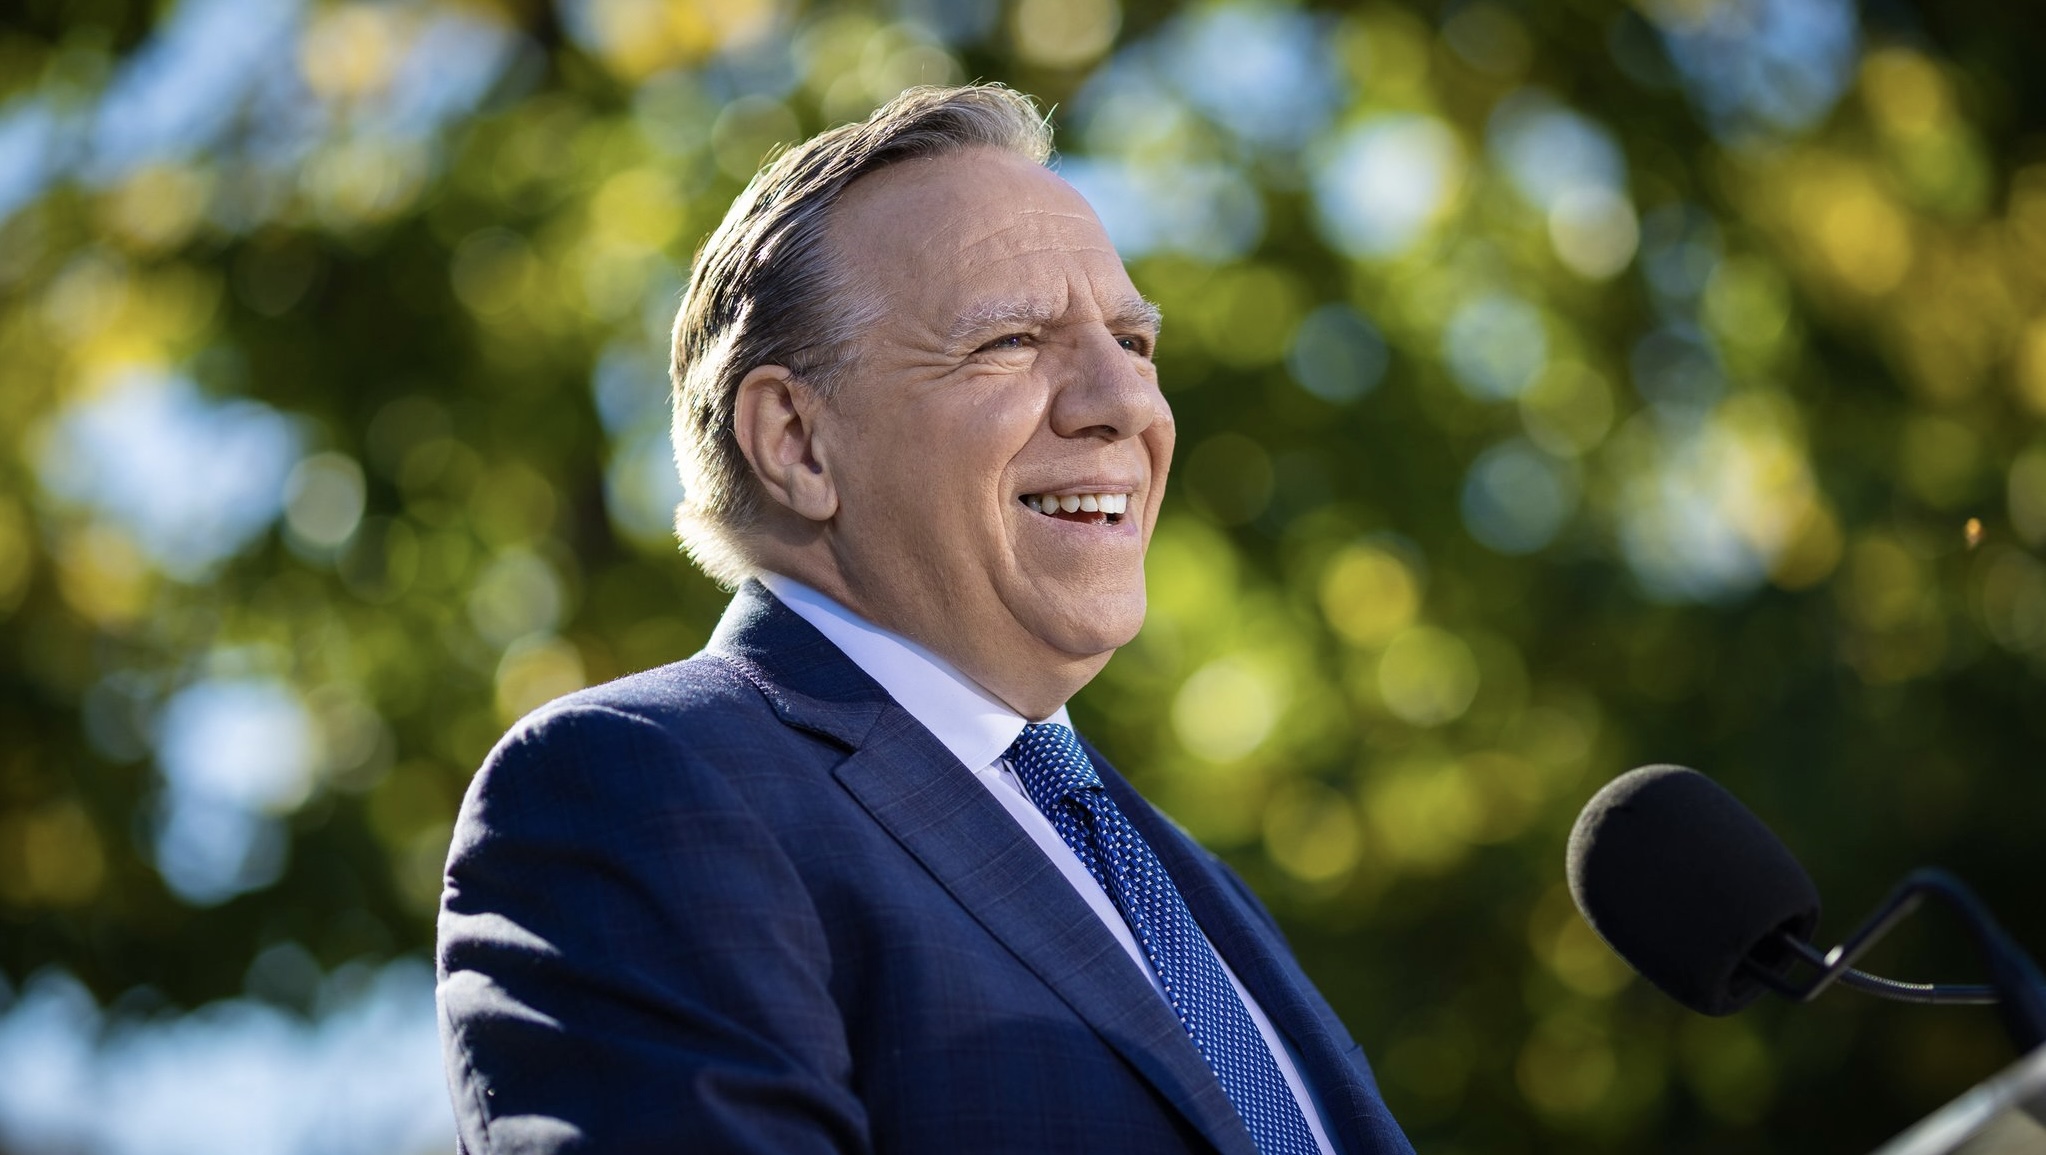 So French isn’t in decline — now what? Here’s what Quebecers want Legault to prioritize